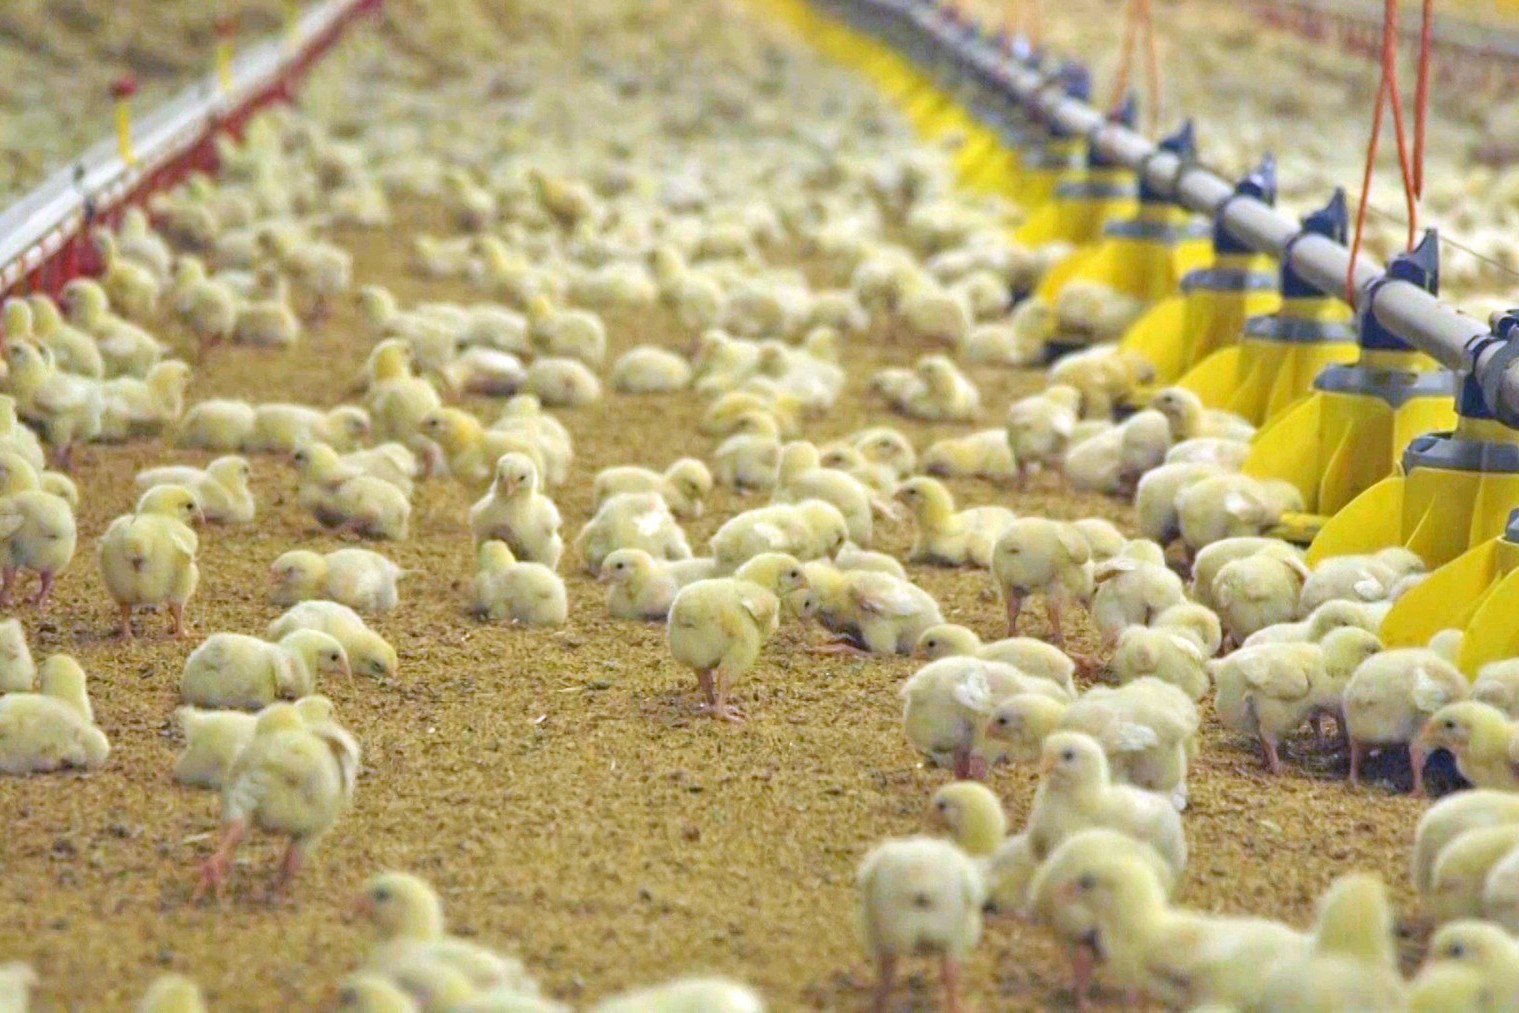 Chicks in an intensive factory farm